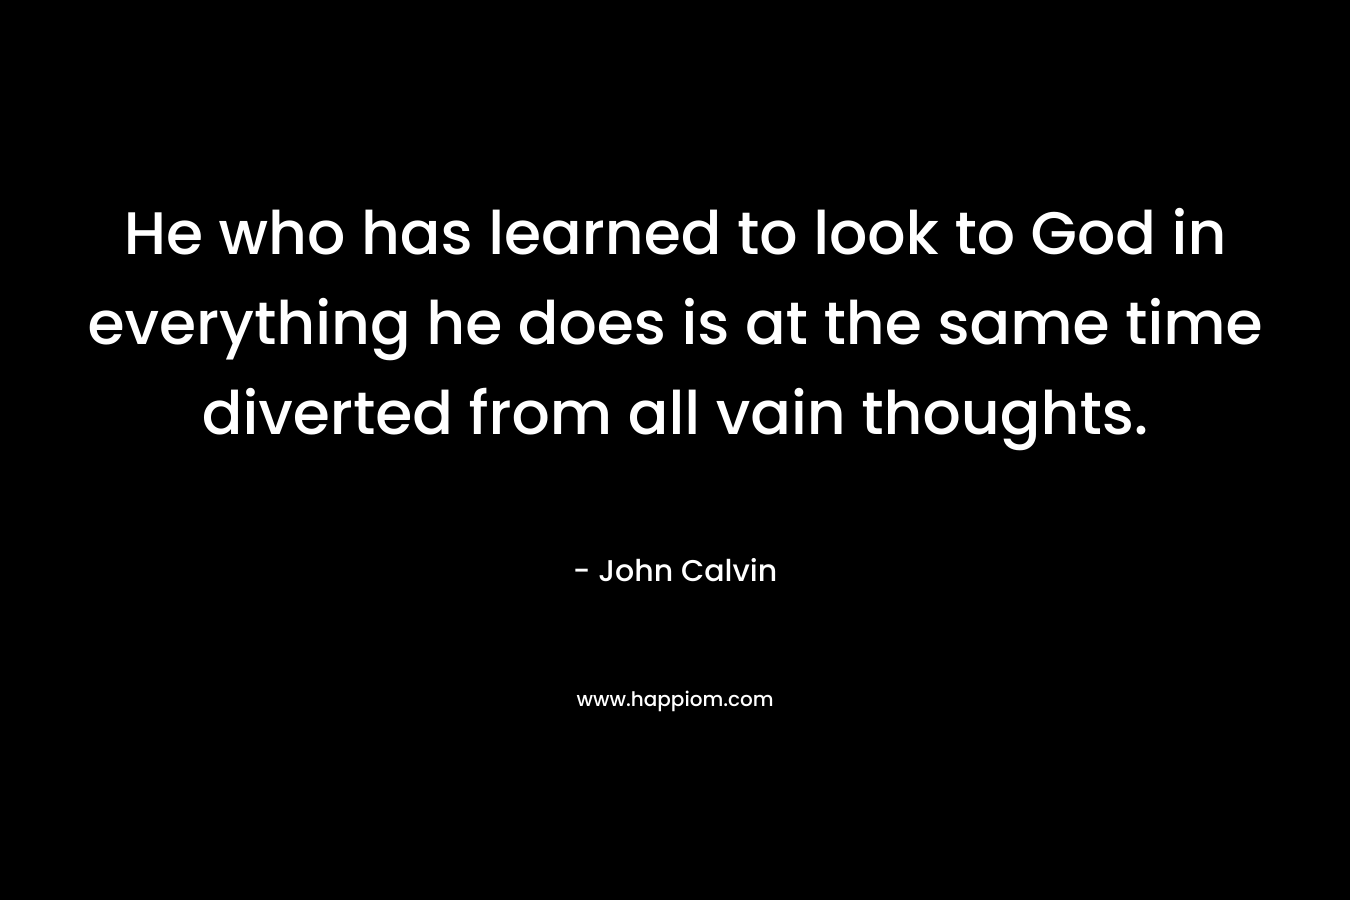 He who has learned to look to God in everything he does is at the same time diverted from all vain thoughts.